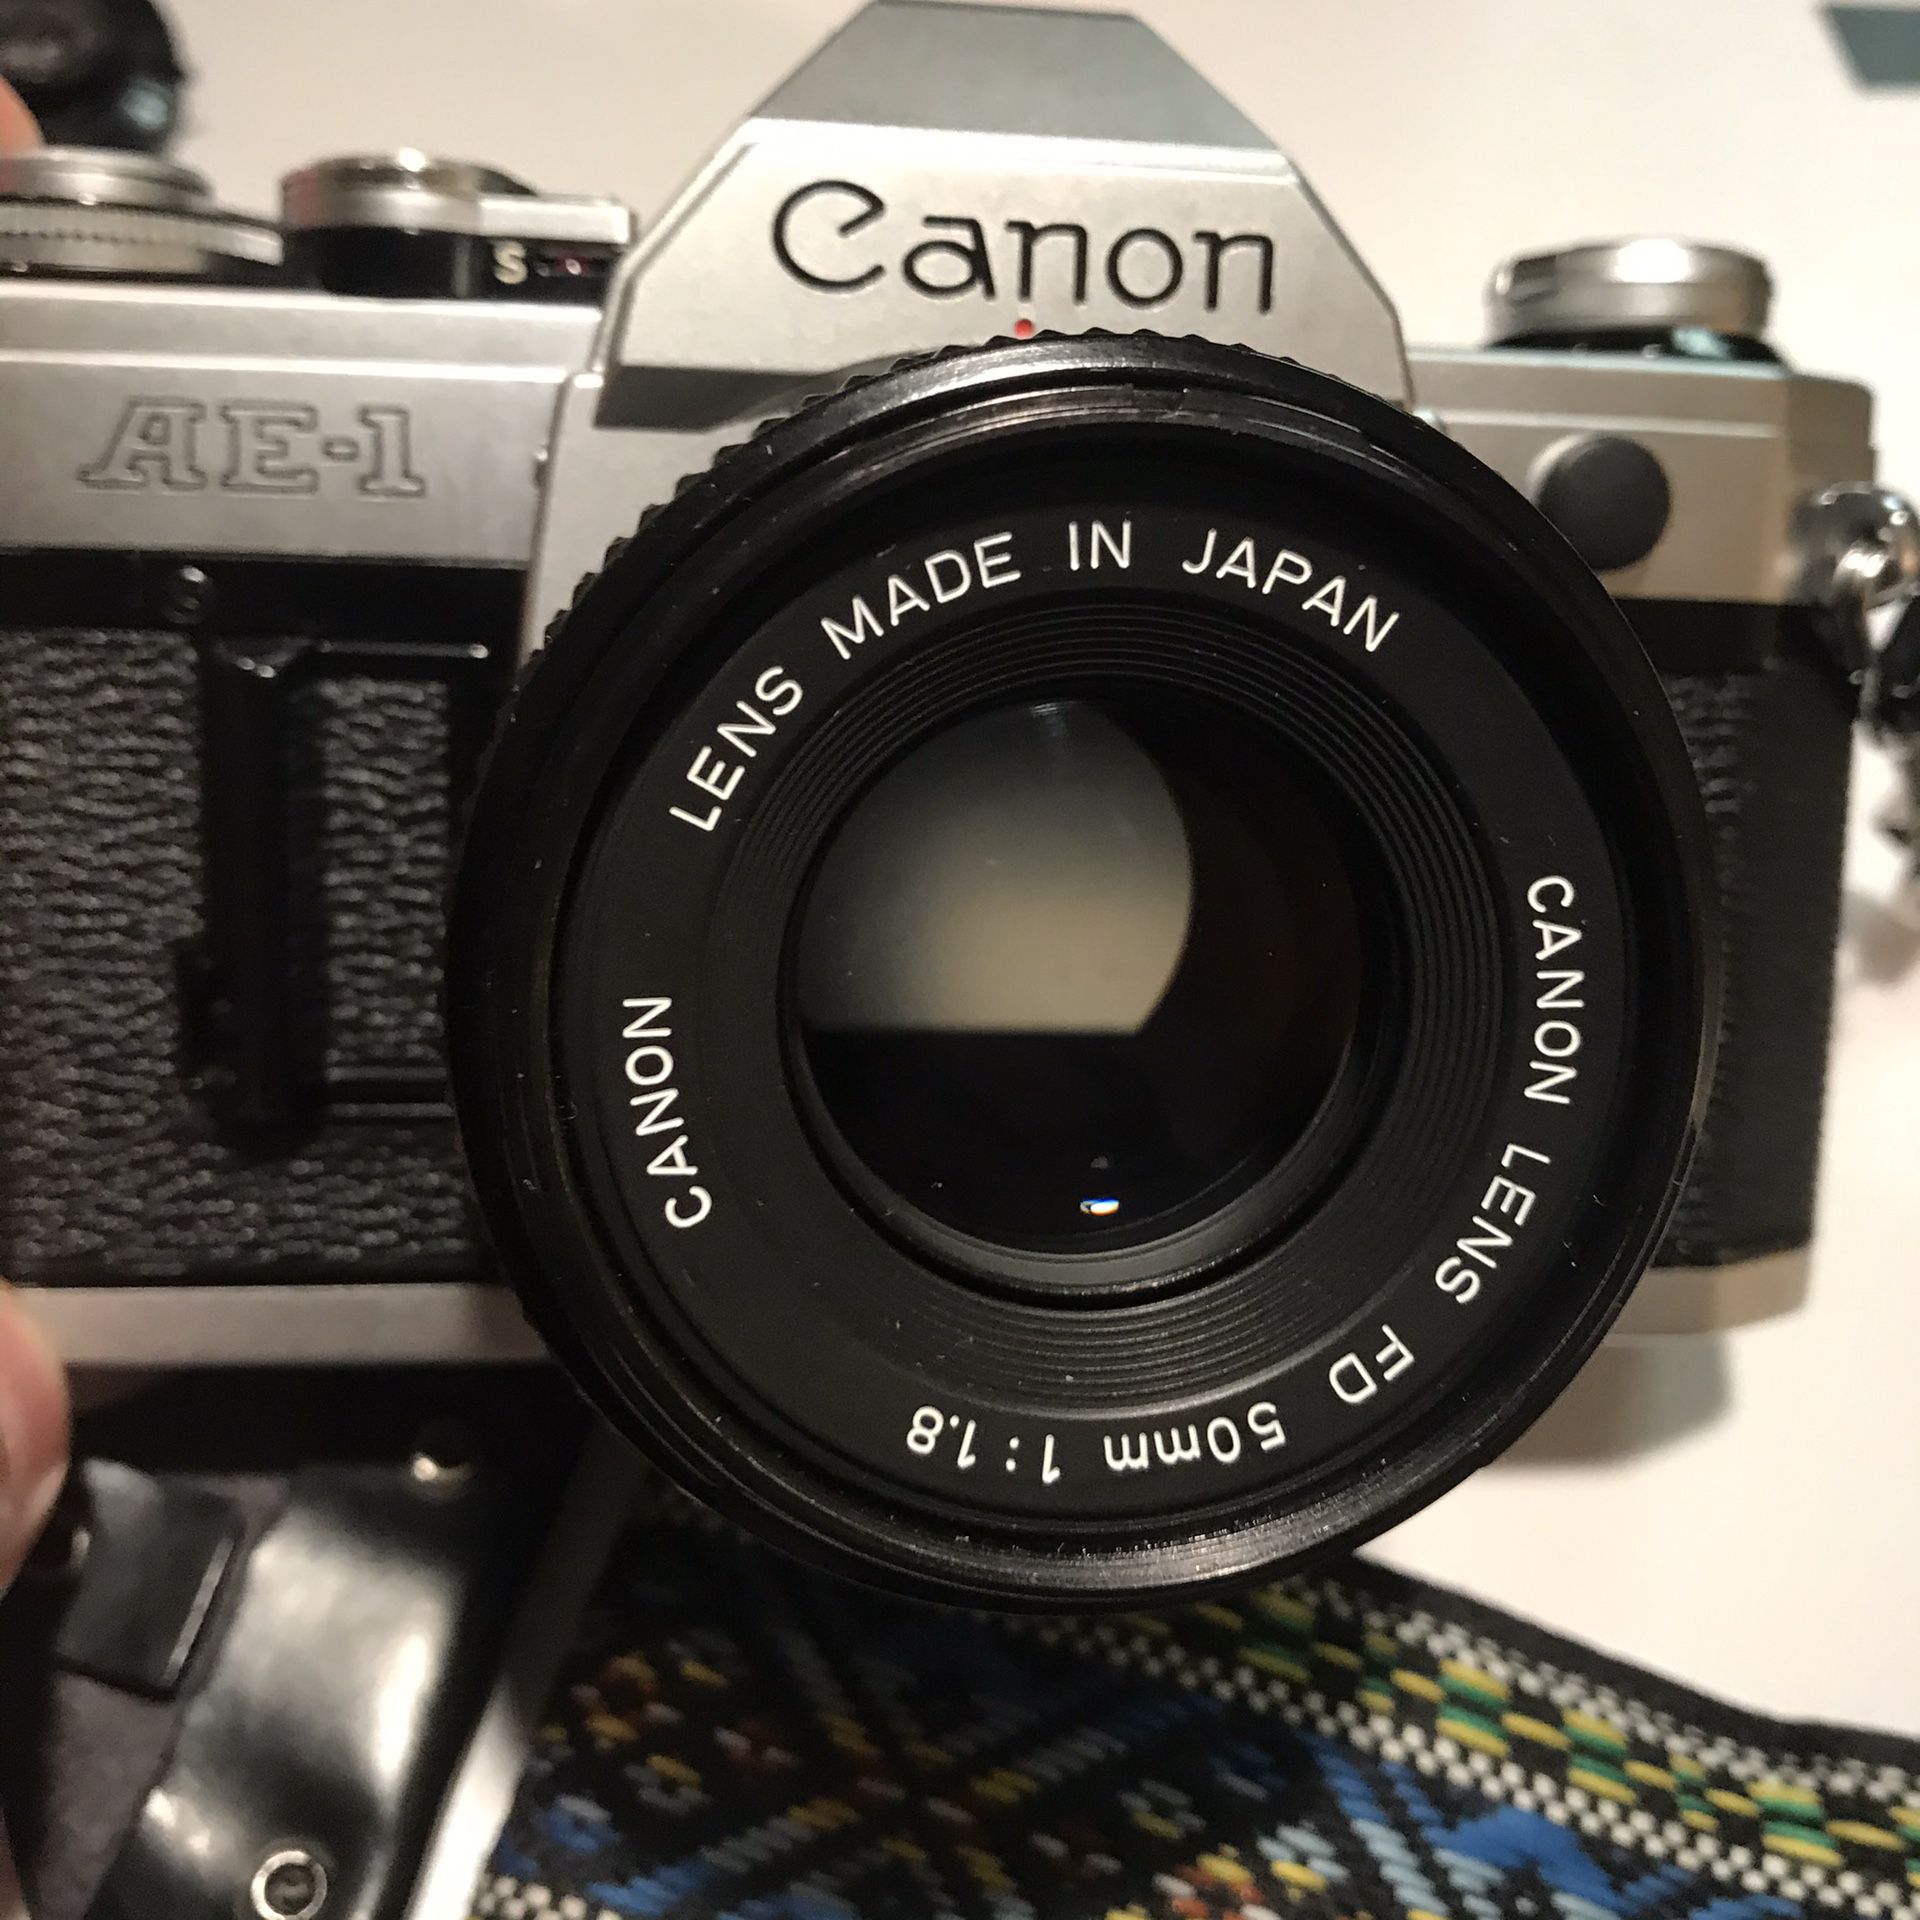 Canon AE-1 35mm Film Camera with 50mm Lens